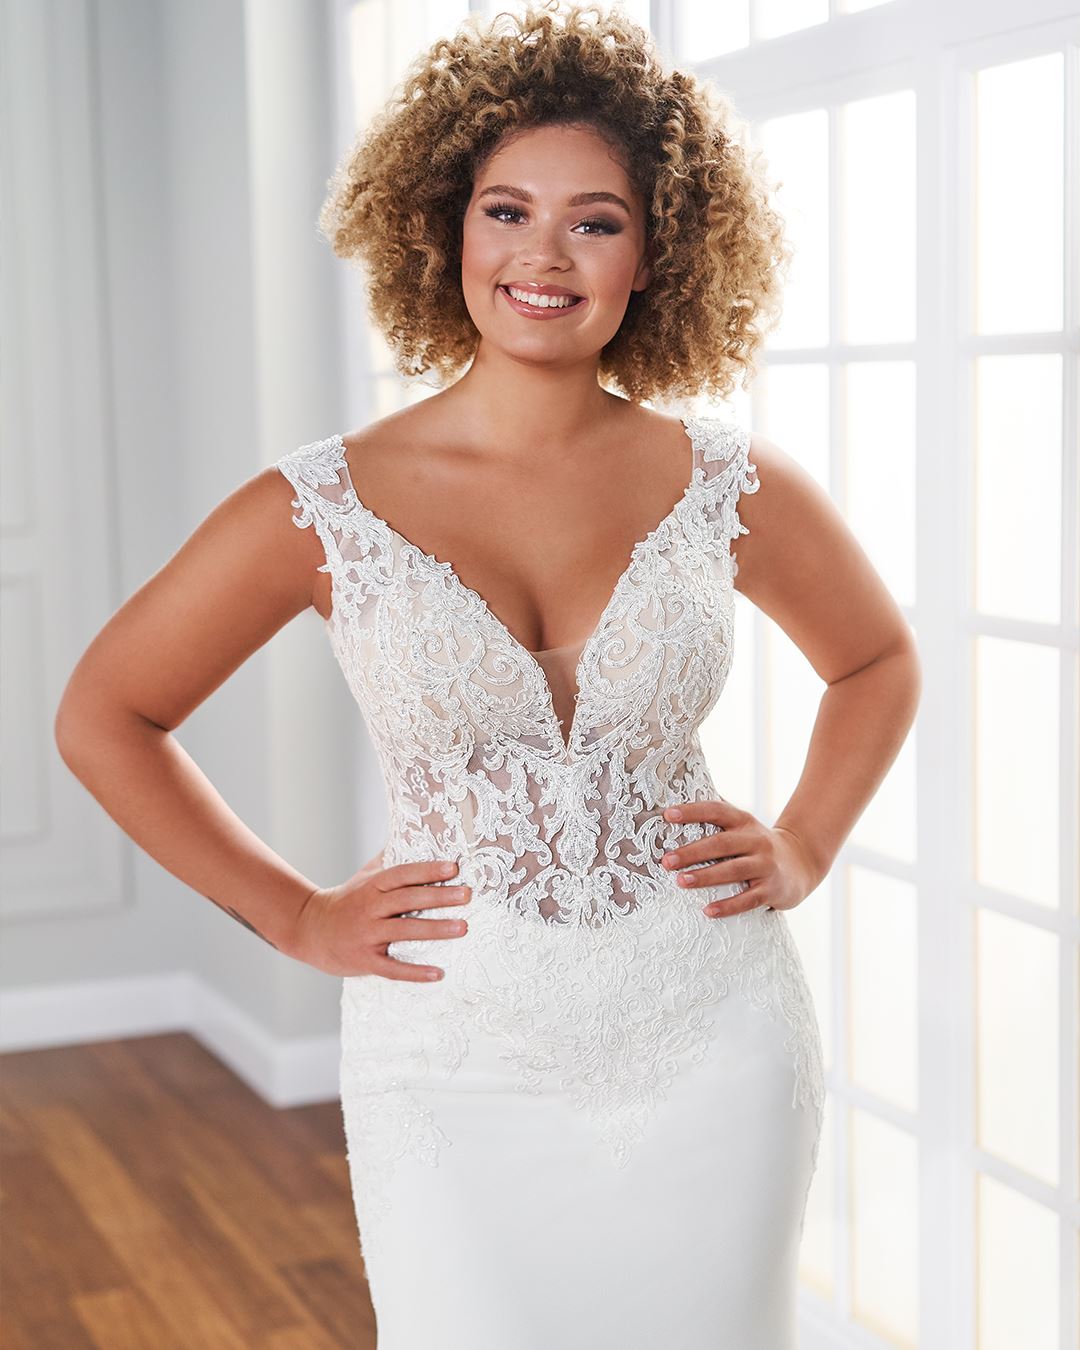 Bride wearing fit and flare wedding dress with lace bodice